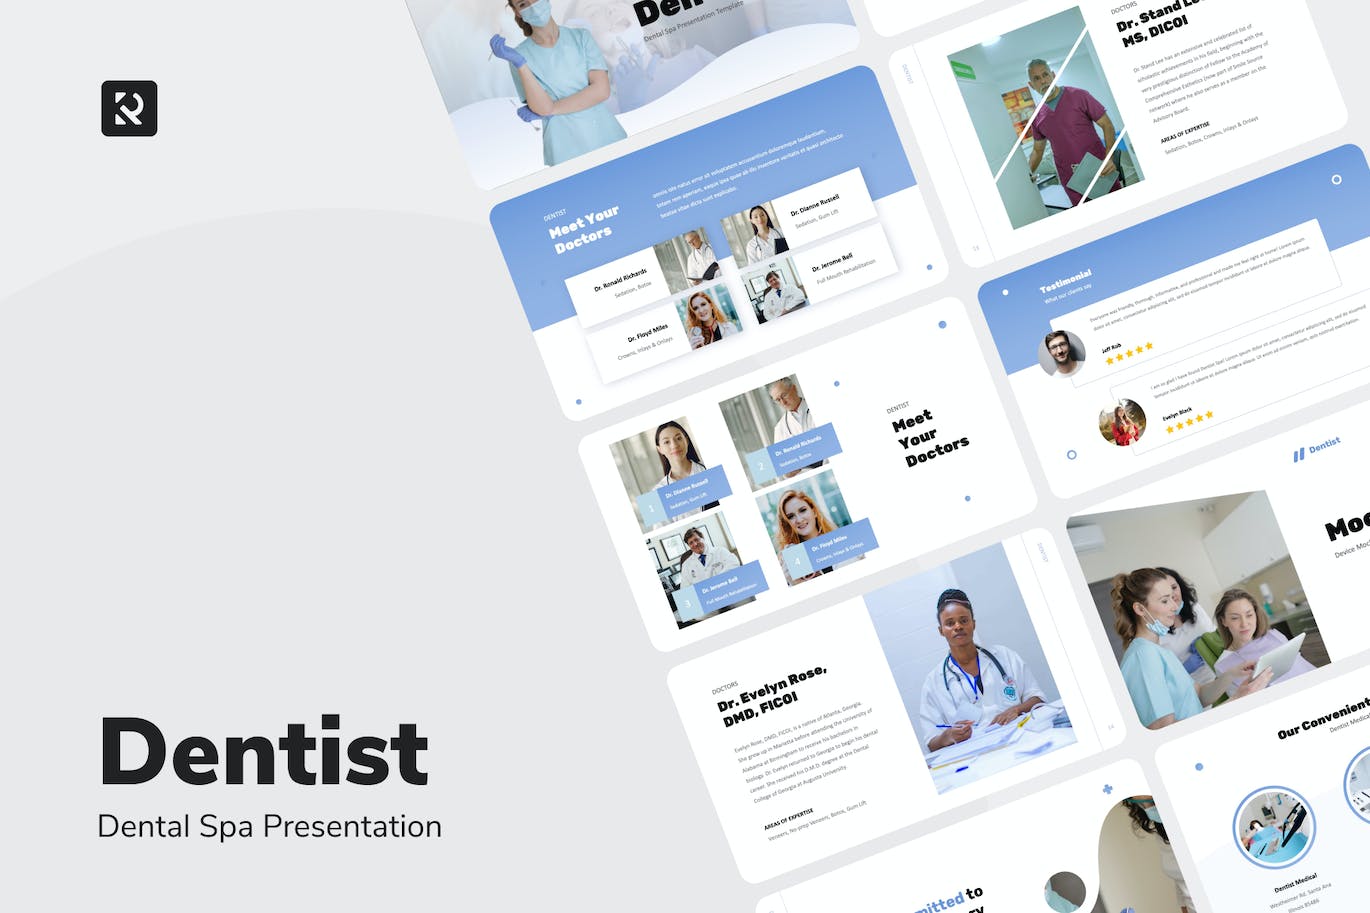 Collection of images of elegant presentation template slides on the topic of dentistry.